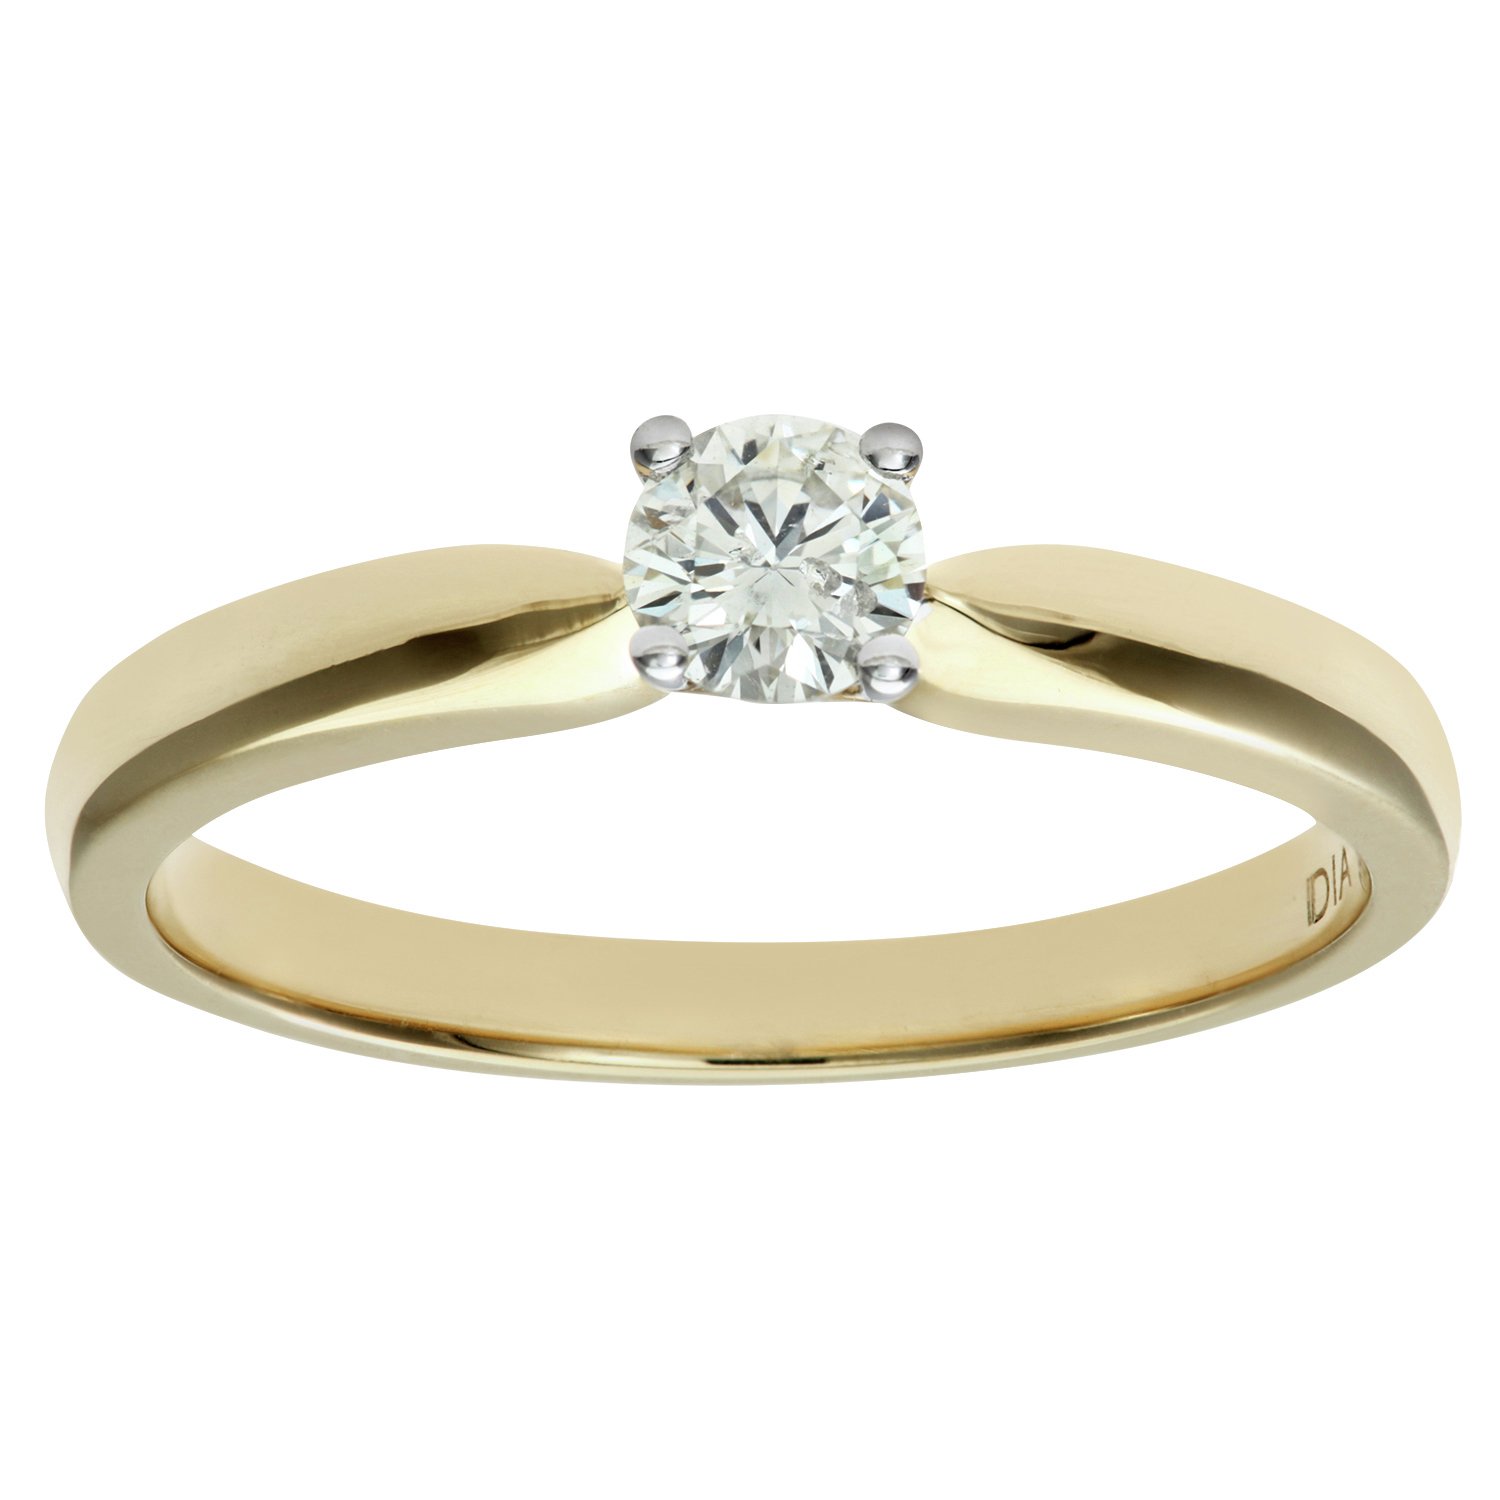 Everlasting Love 18ct Gold 0.25ct Solitaire Ring - Size N